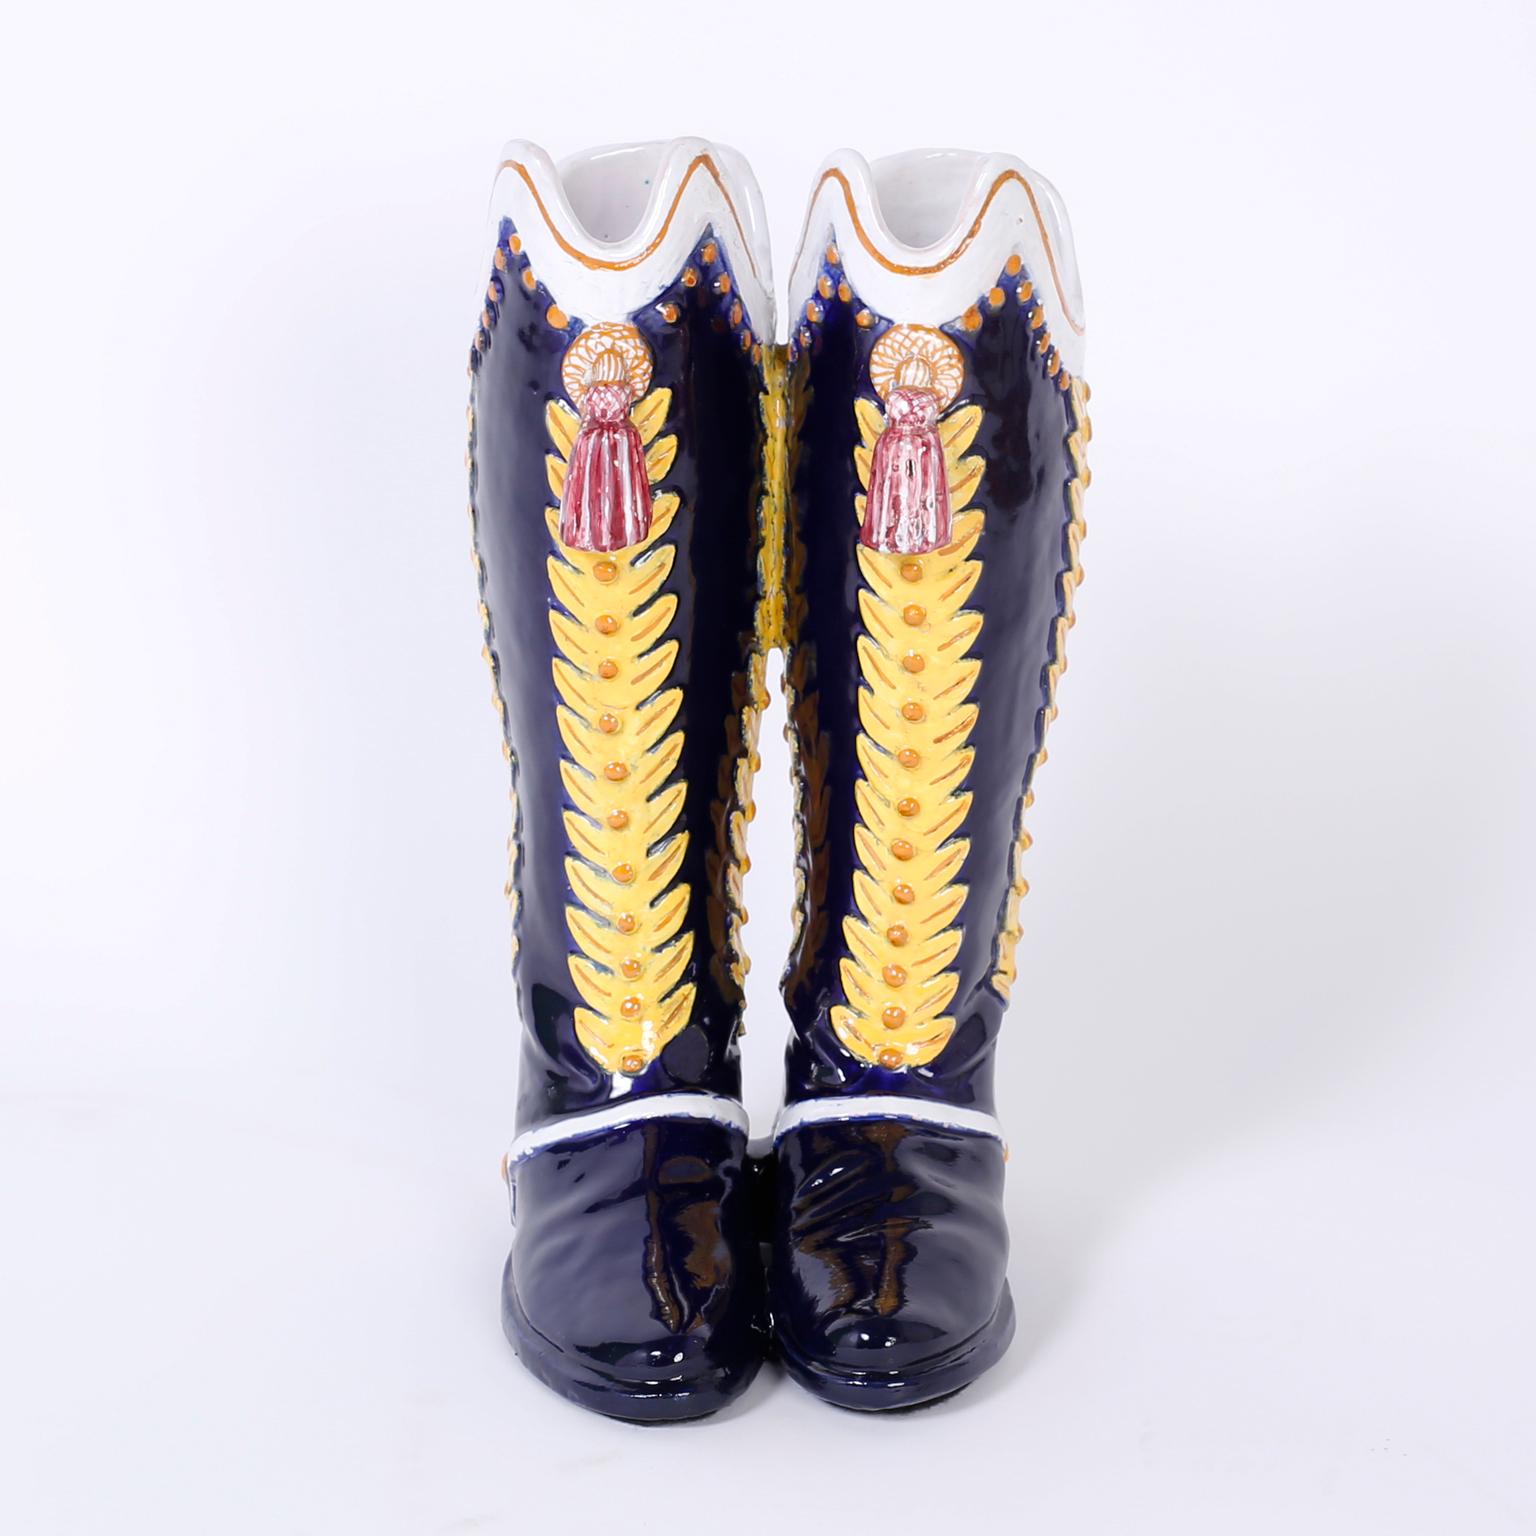 Whimsical midcentury Majolica or glazed terra cotta umbrella or cane Stand in the form of Italian military boots complete with tassels and spurs.